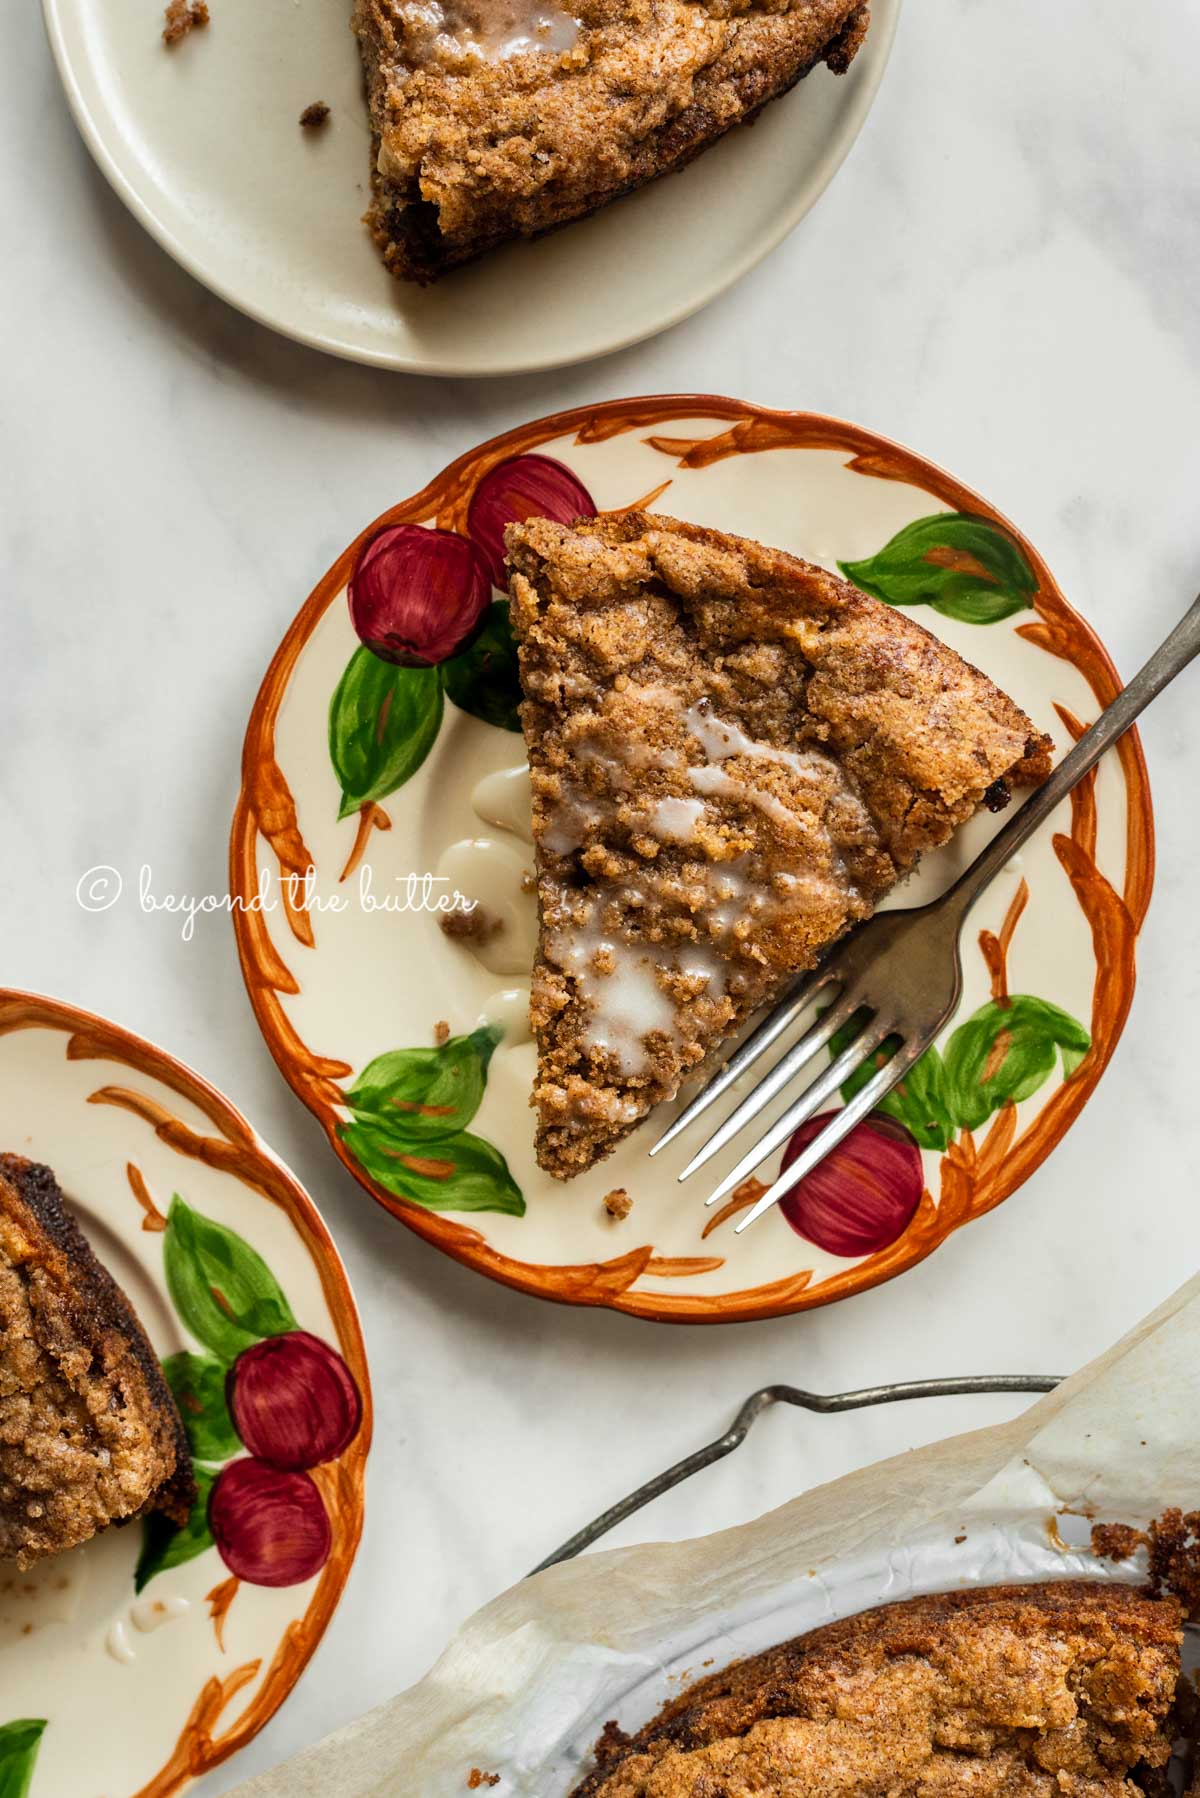 Slices of warm apple coffee cake on dessert plates drizzled with a simple vanilla glaze | All Images © Beyond the Butter™